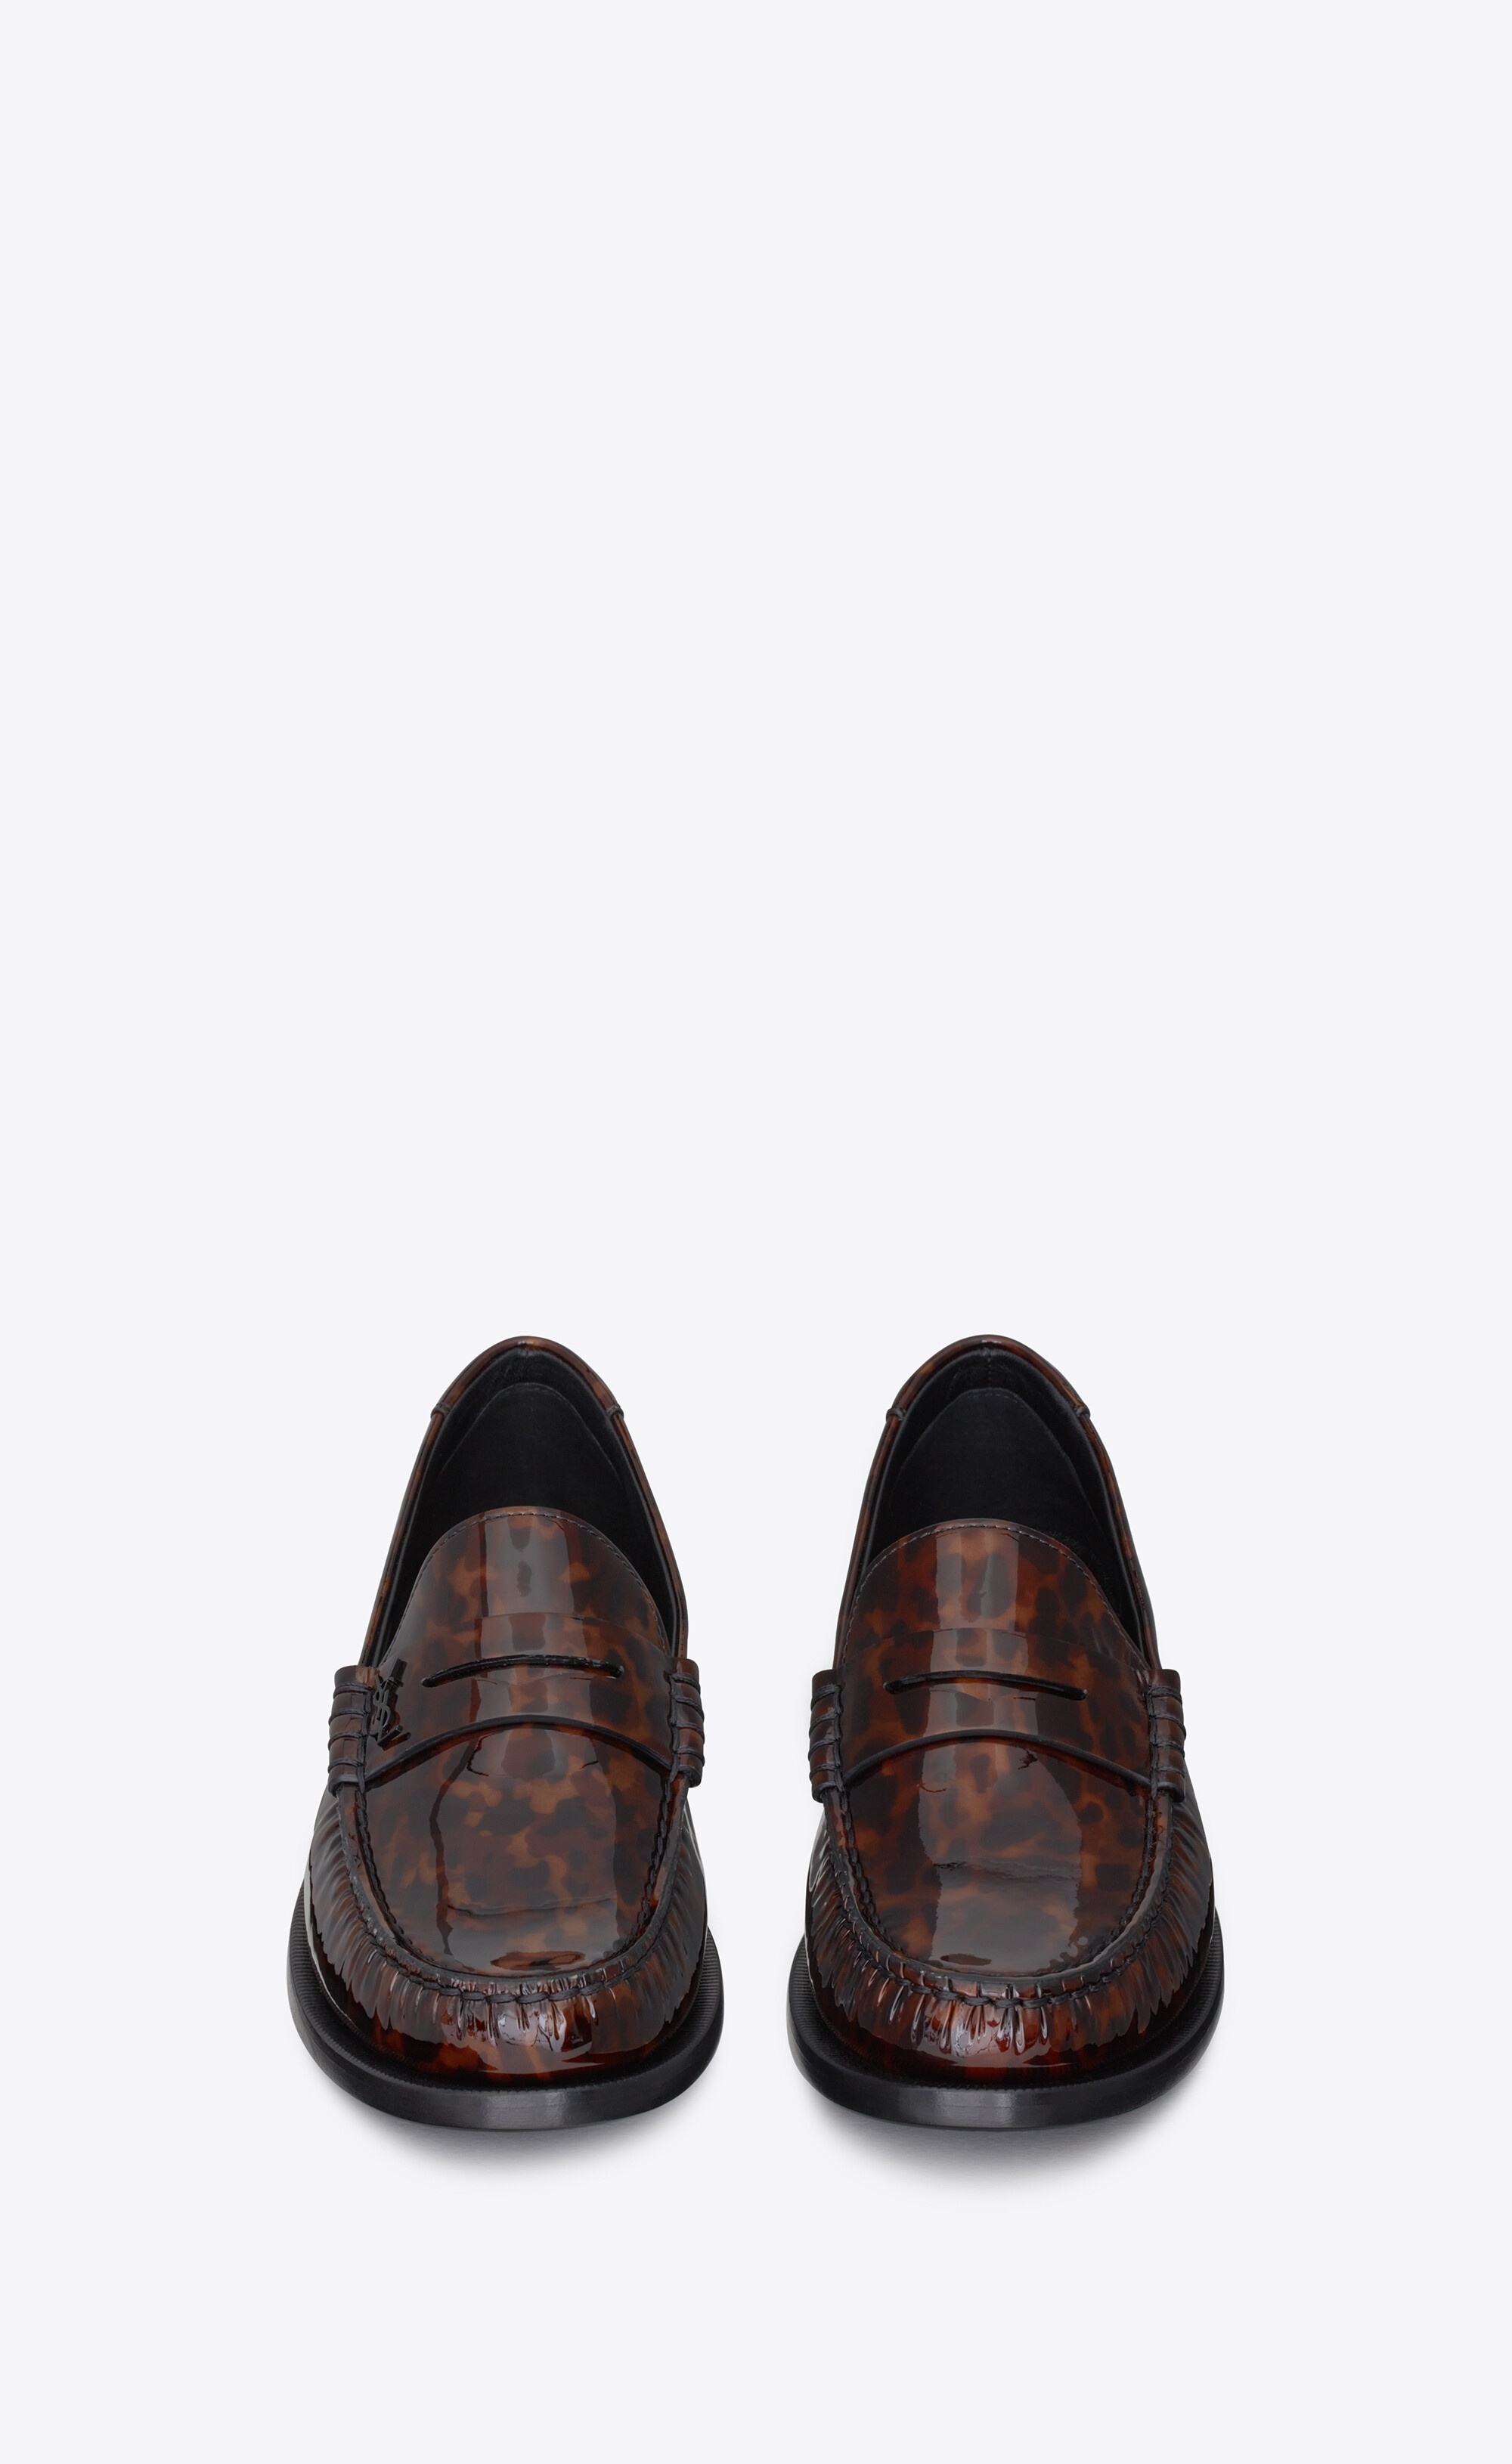 le loafer monogram penny slippers in tortoiseshell patent leather - 2